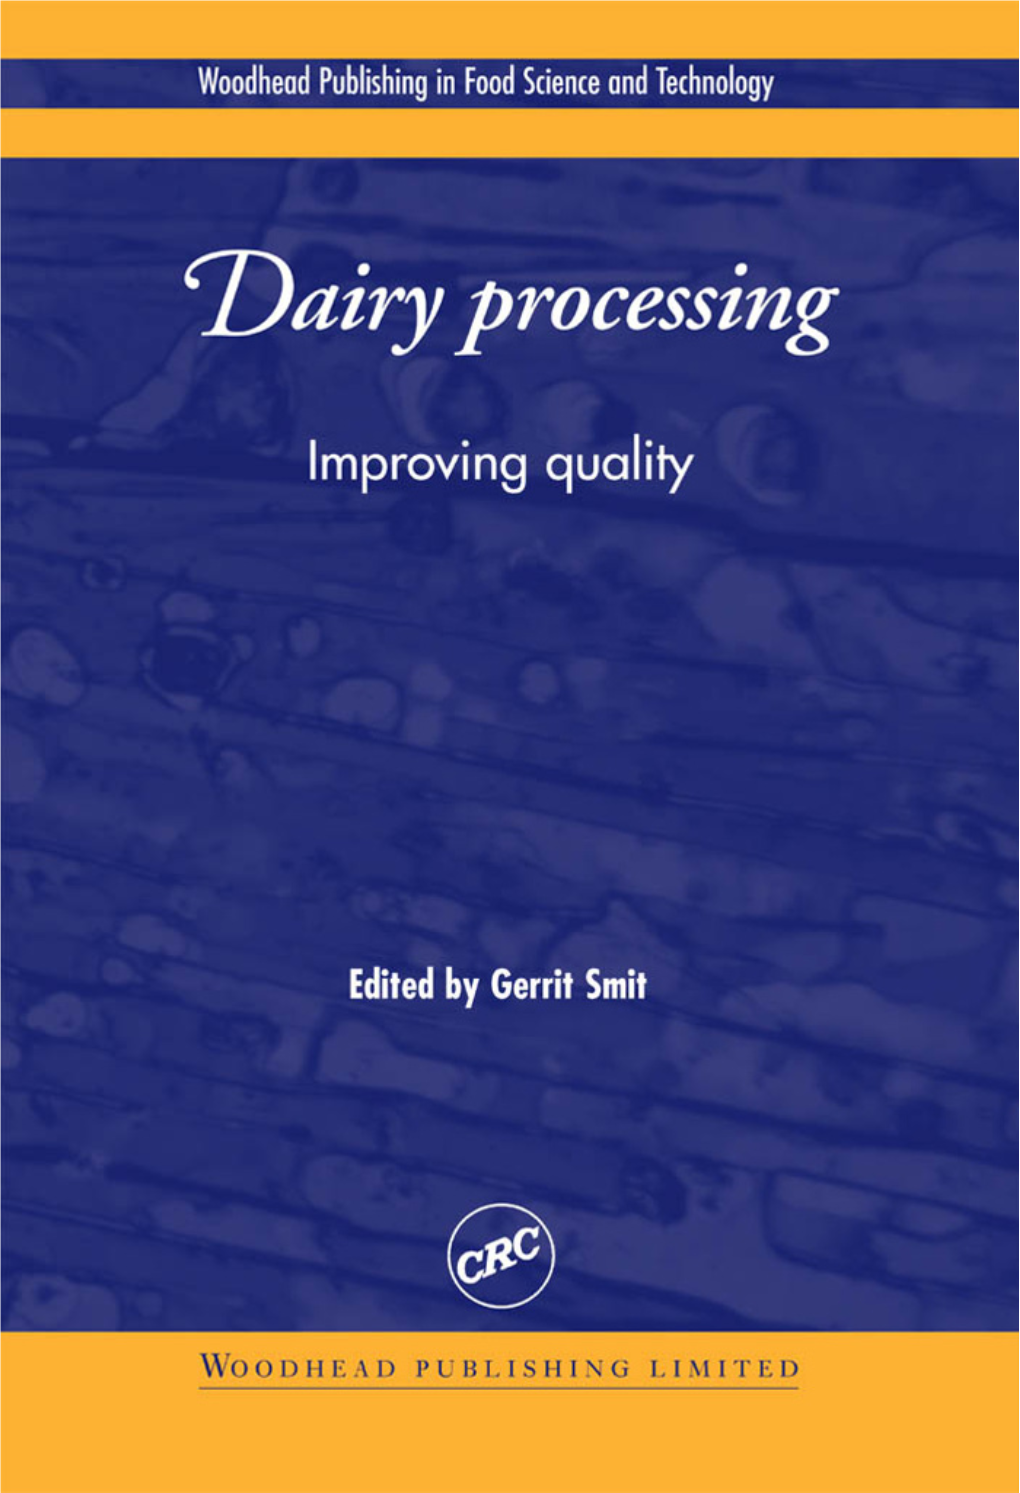 Dairy Processing Related Titles from Woodhead’S Food Science, Technology and Nutrition List